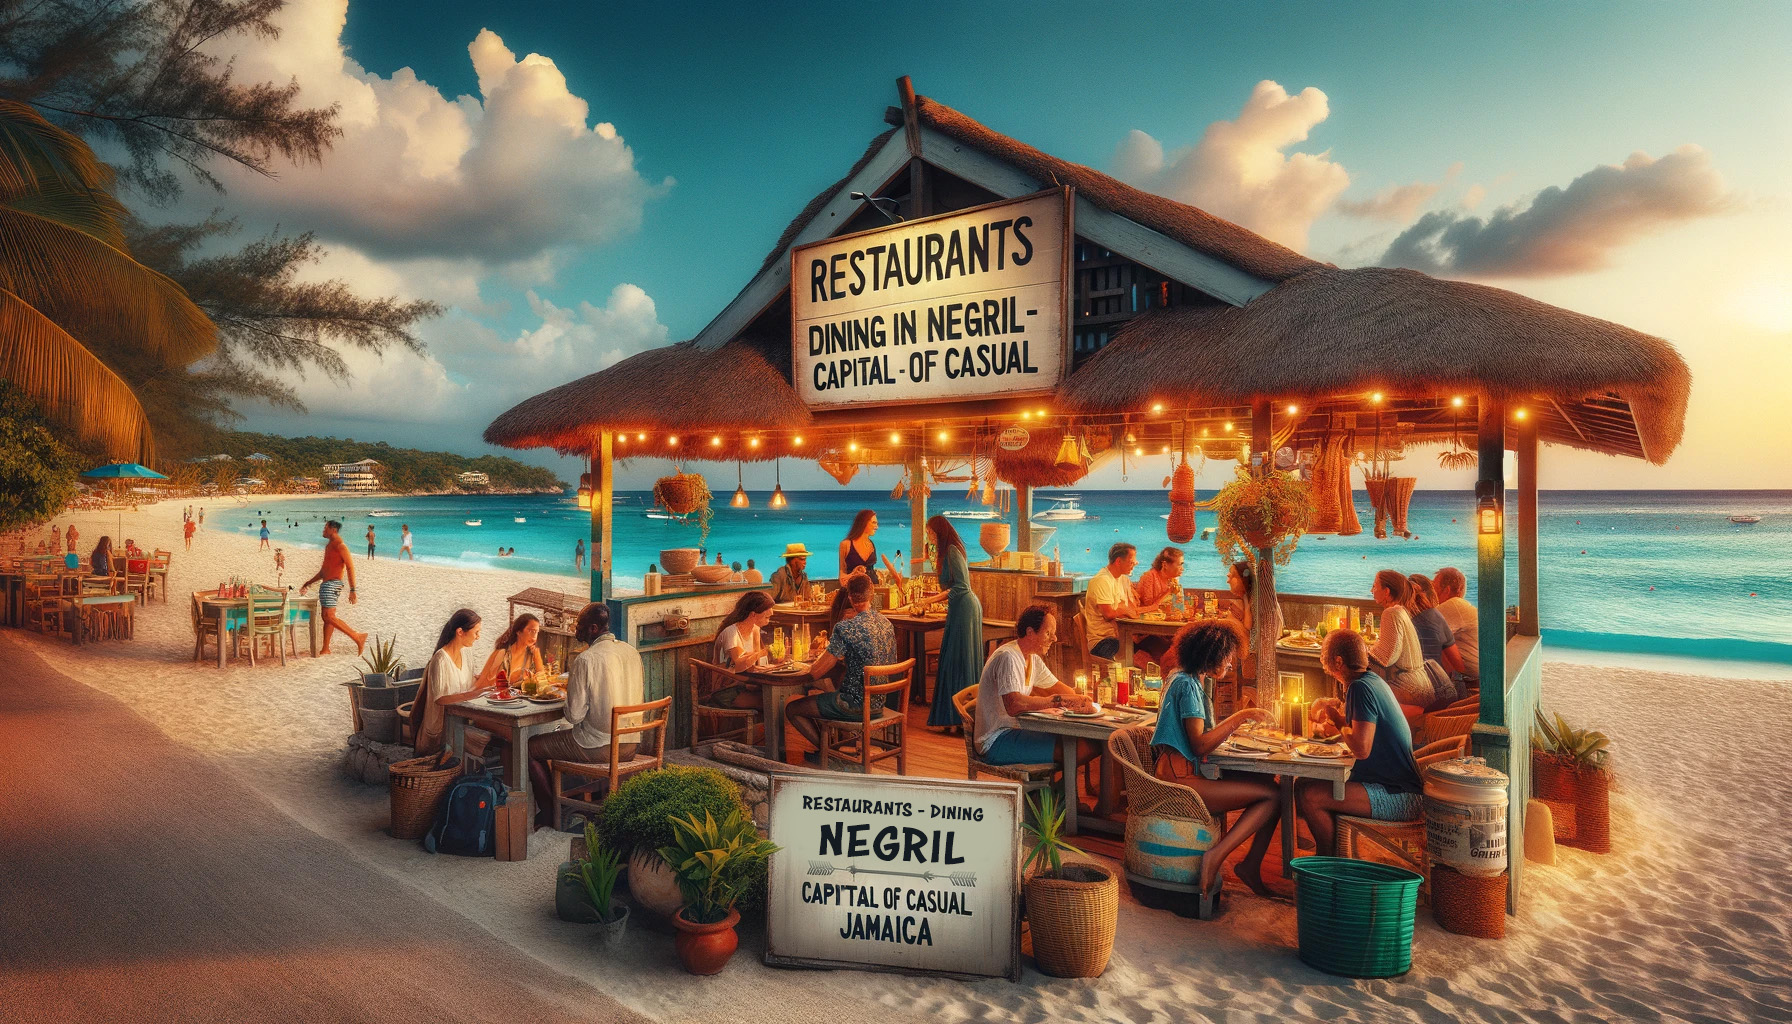 Restaurants - Dining in Negril Capital of Casual Jamaica